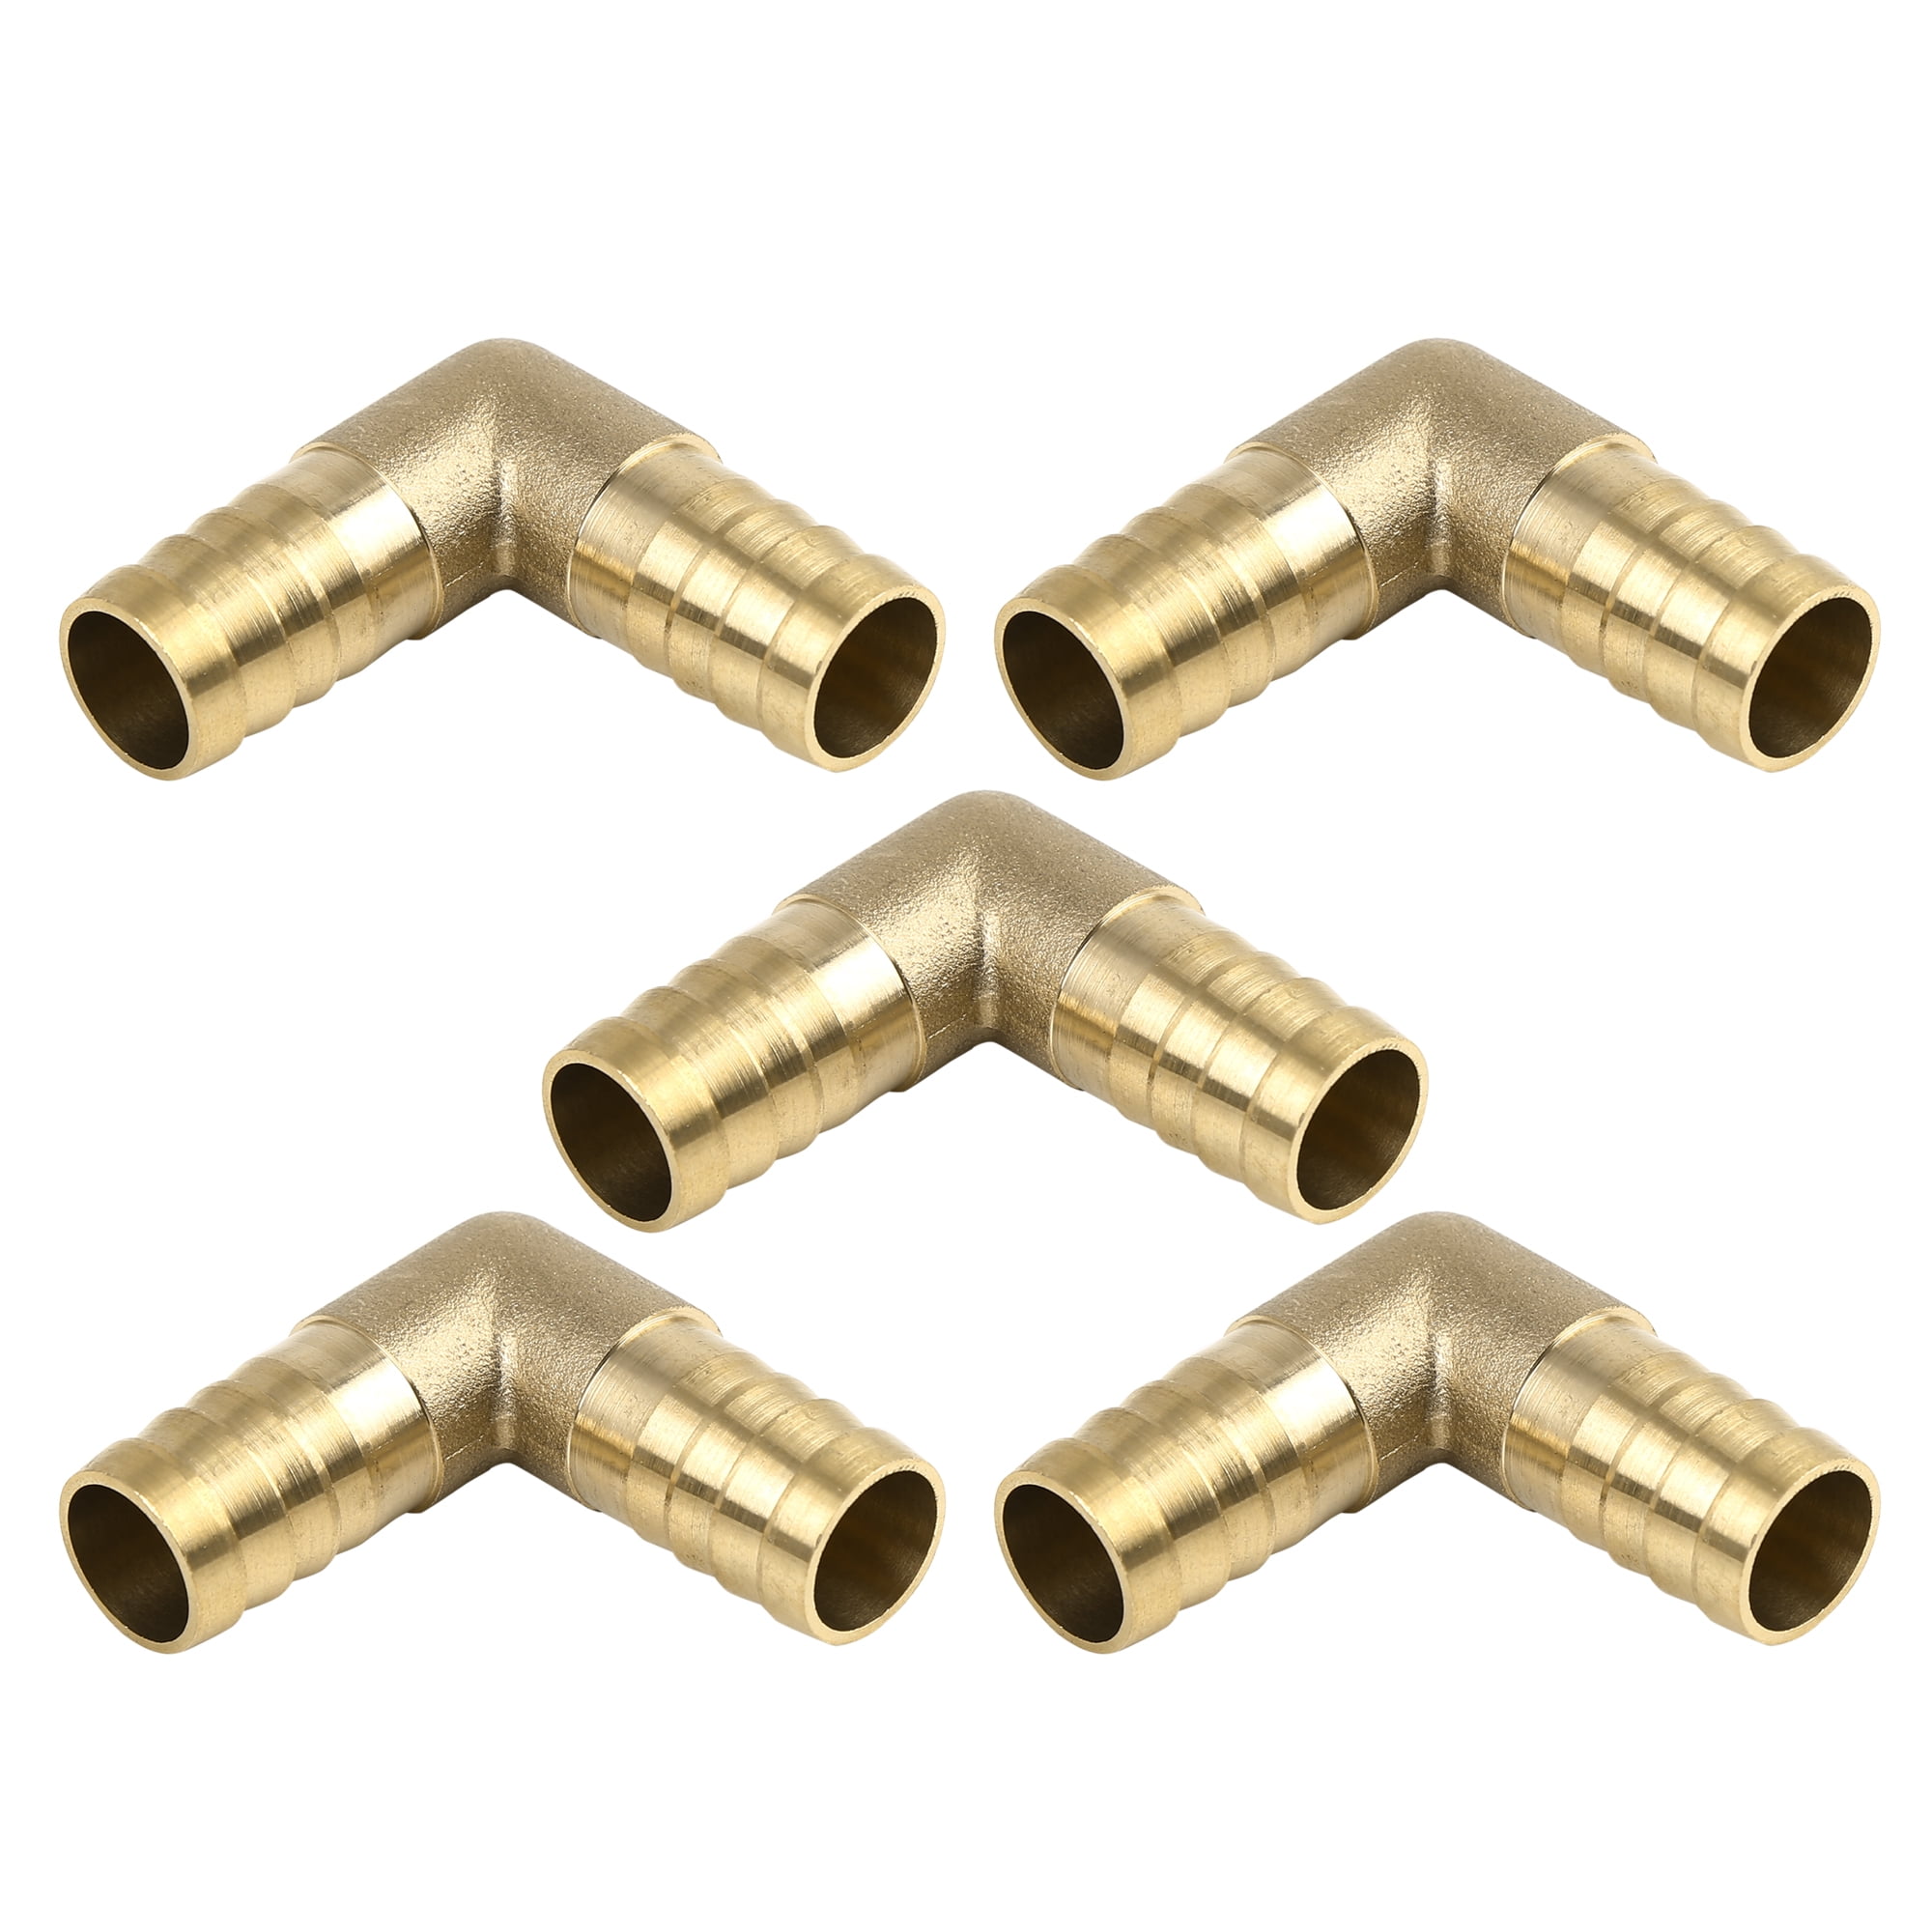 5pcs Male to female Thread Elbow Brass Adapter Fitting Connector For Lube Tubing 